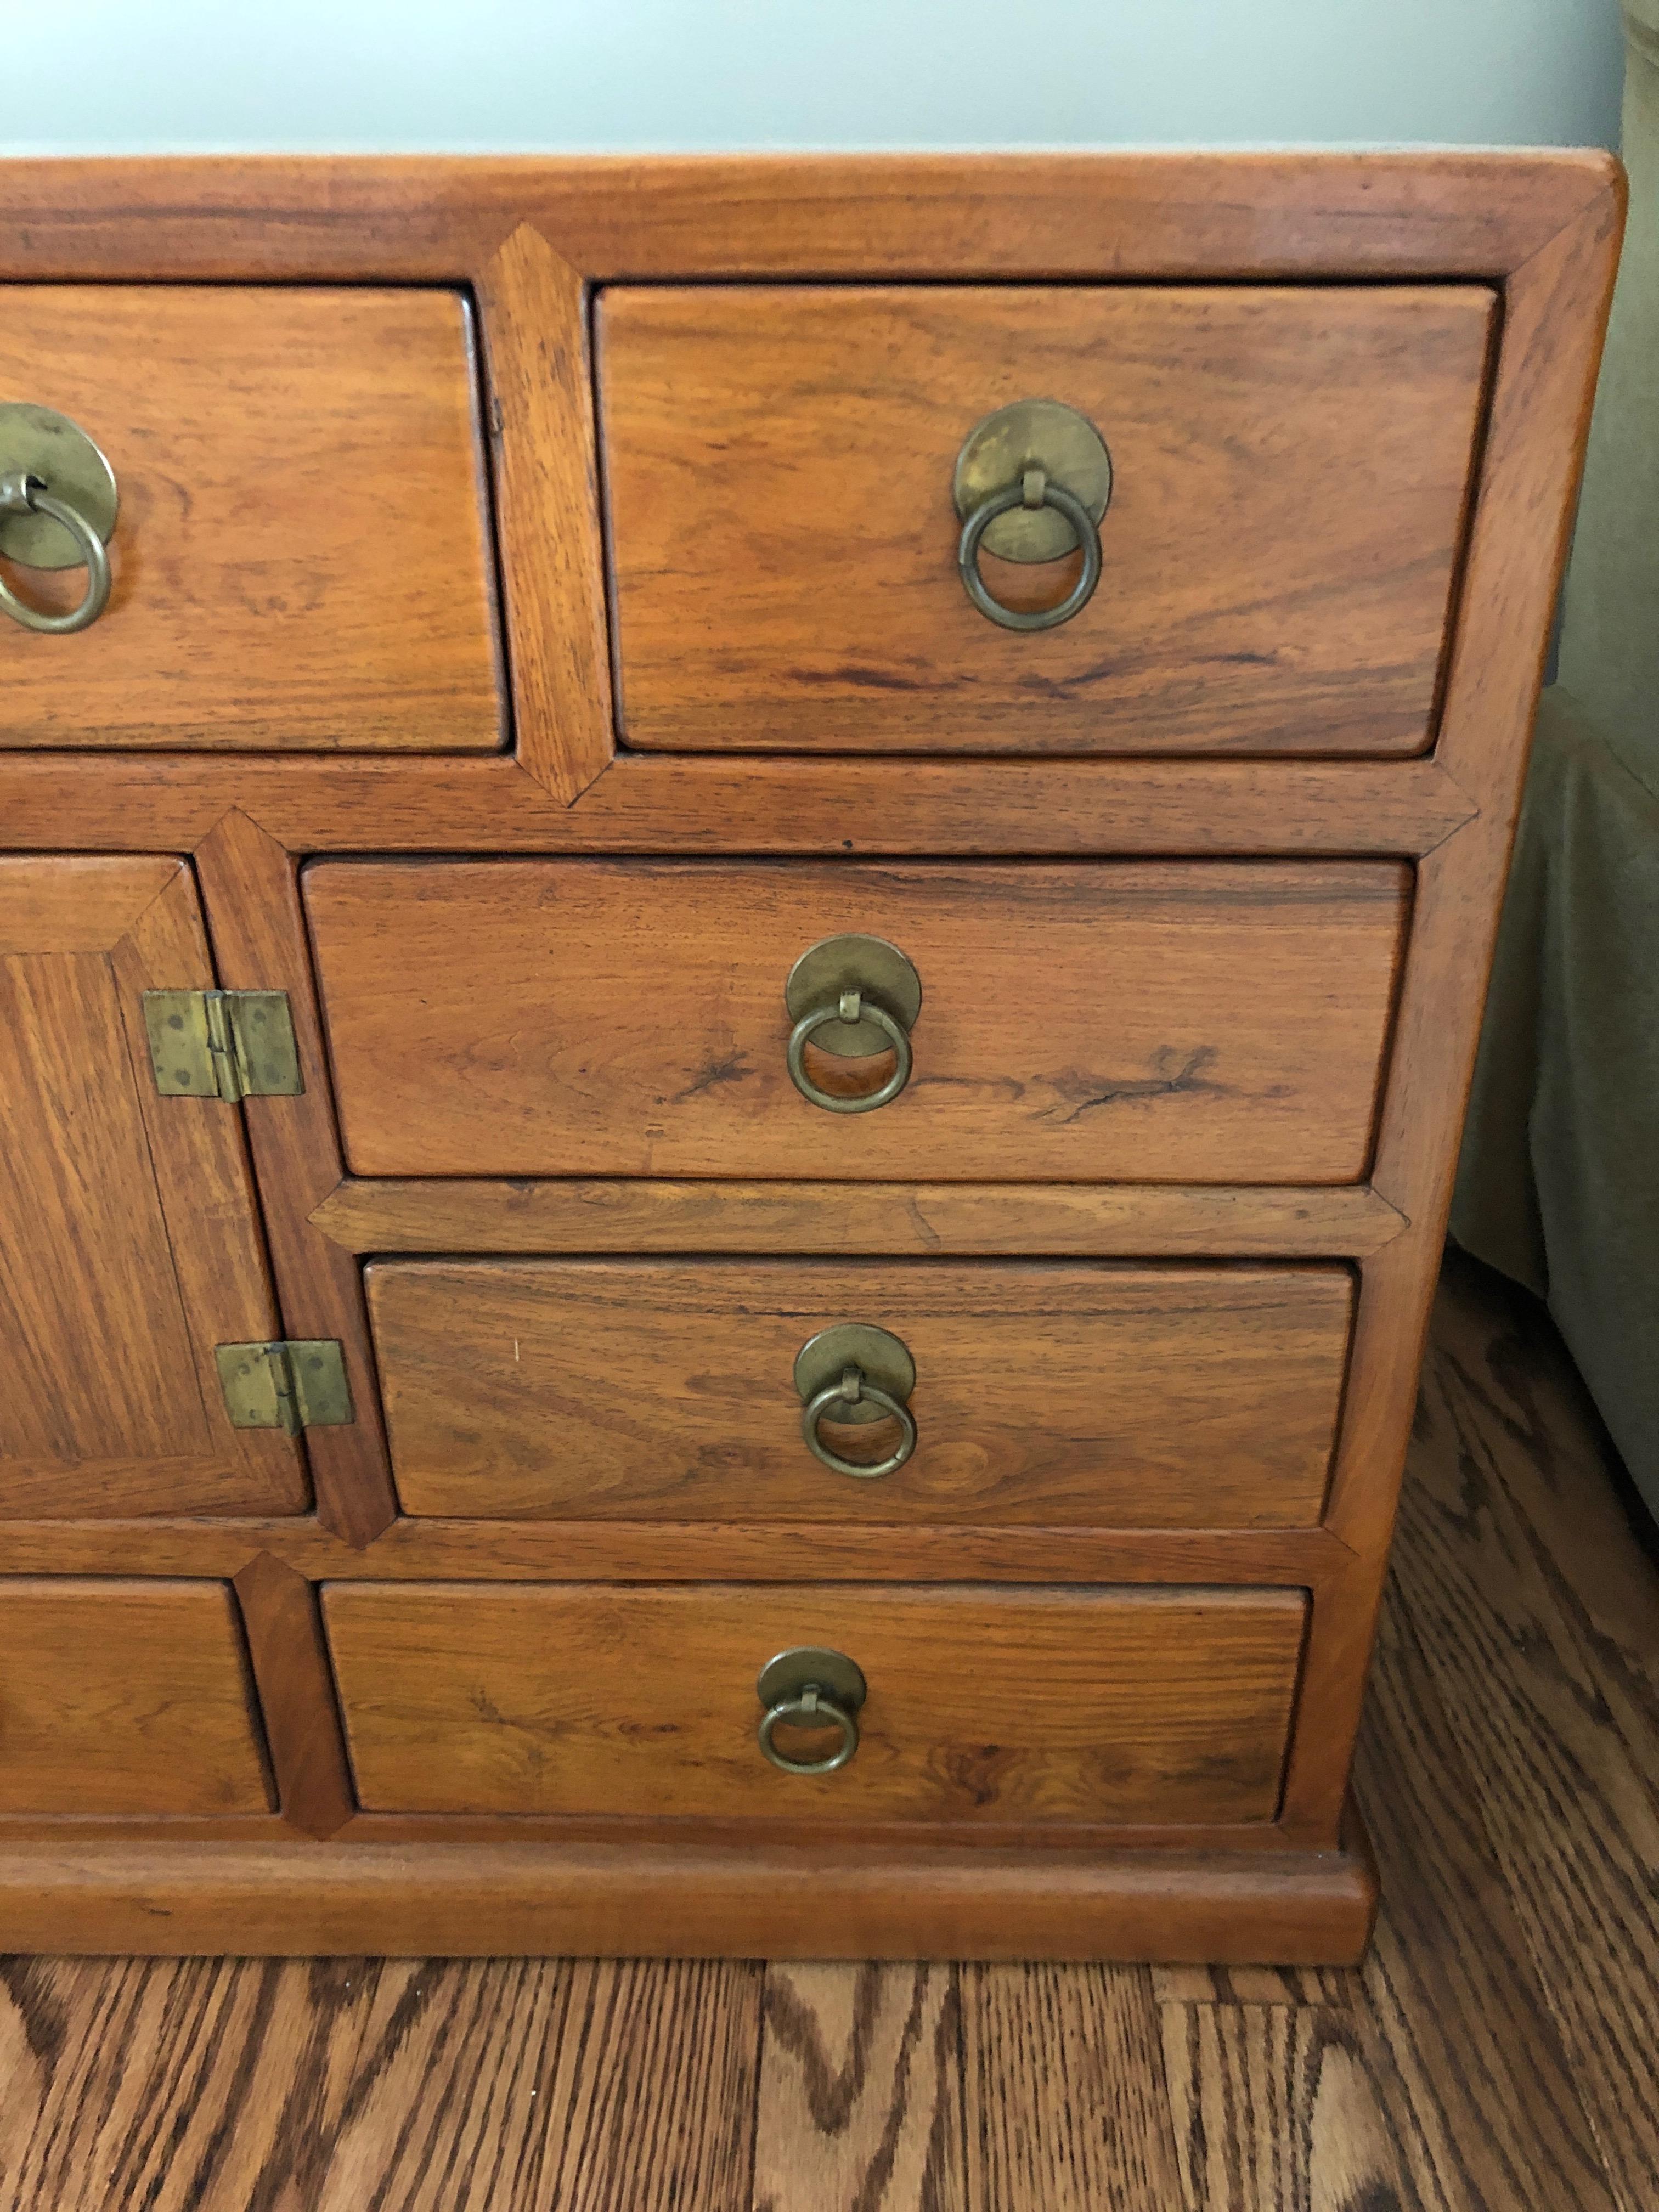 Beautiful antique apothecary or medicine chest traditionally used to store household medicinal herbs. The rectangular low chest has a variety of different sized drawers, original brass handles, two swing side handles and a molded base. Makes a